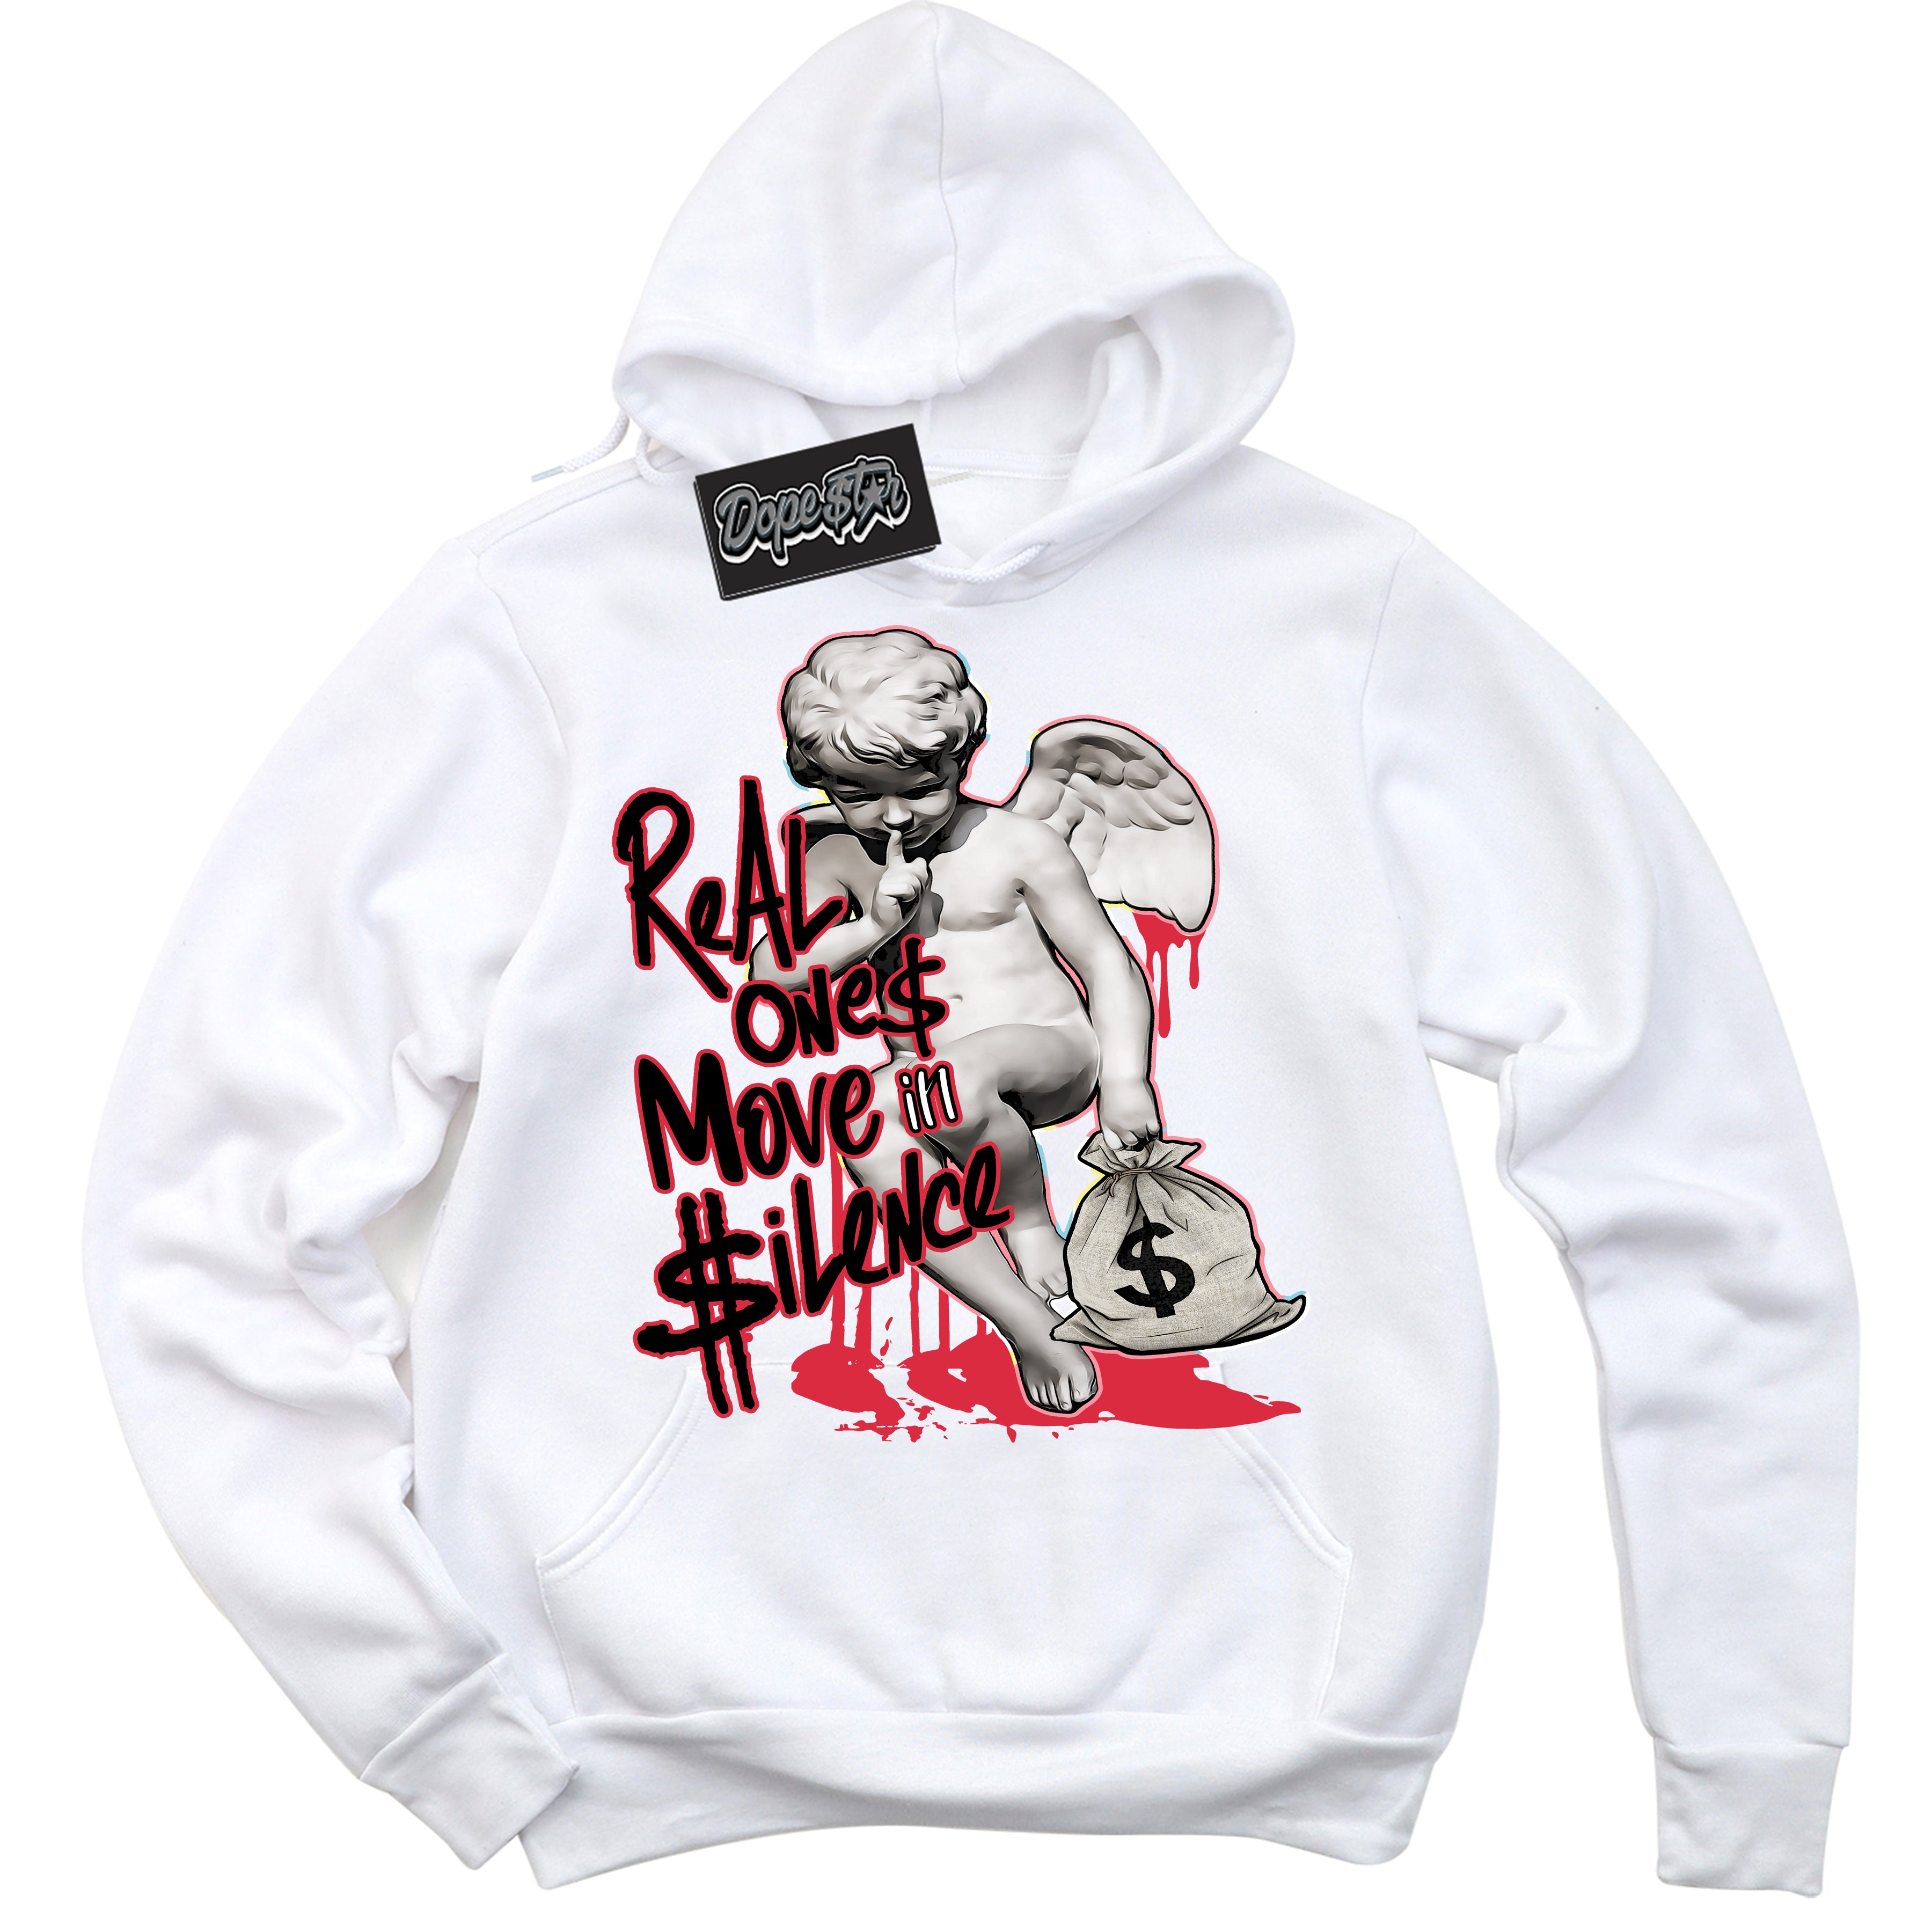 Cool White Graphic DopeStar Hoodie with “ Real Ones Cherub “ print, that perfectly matches Spider-Verse 1s sneakers